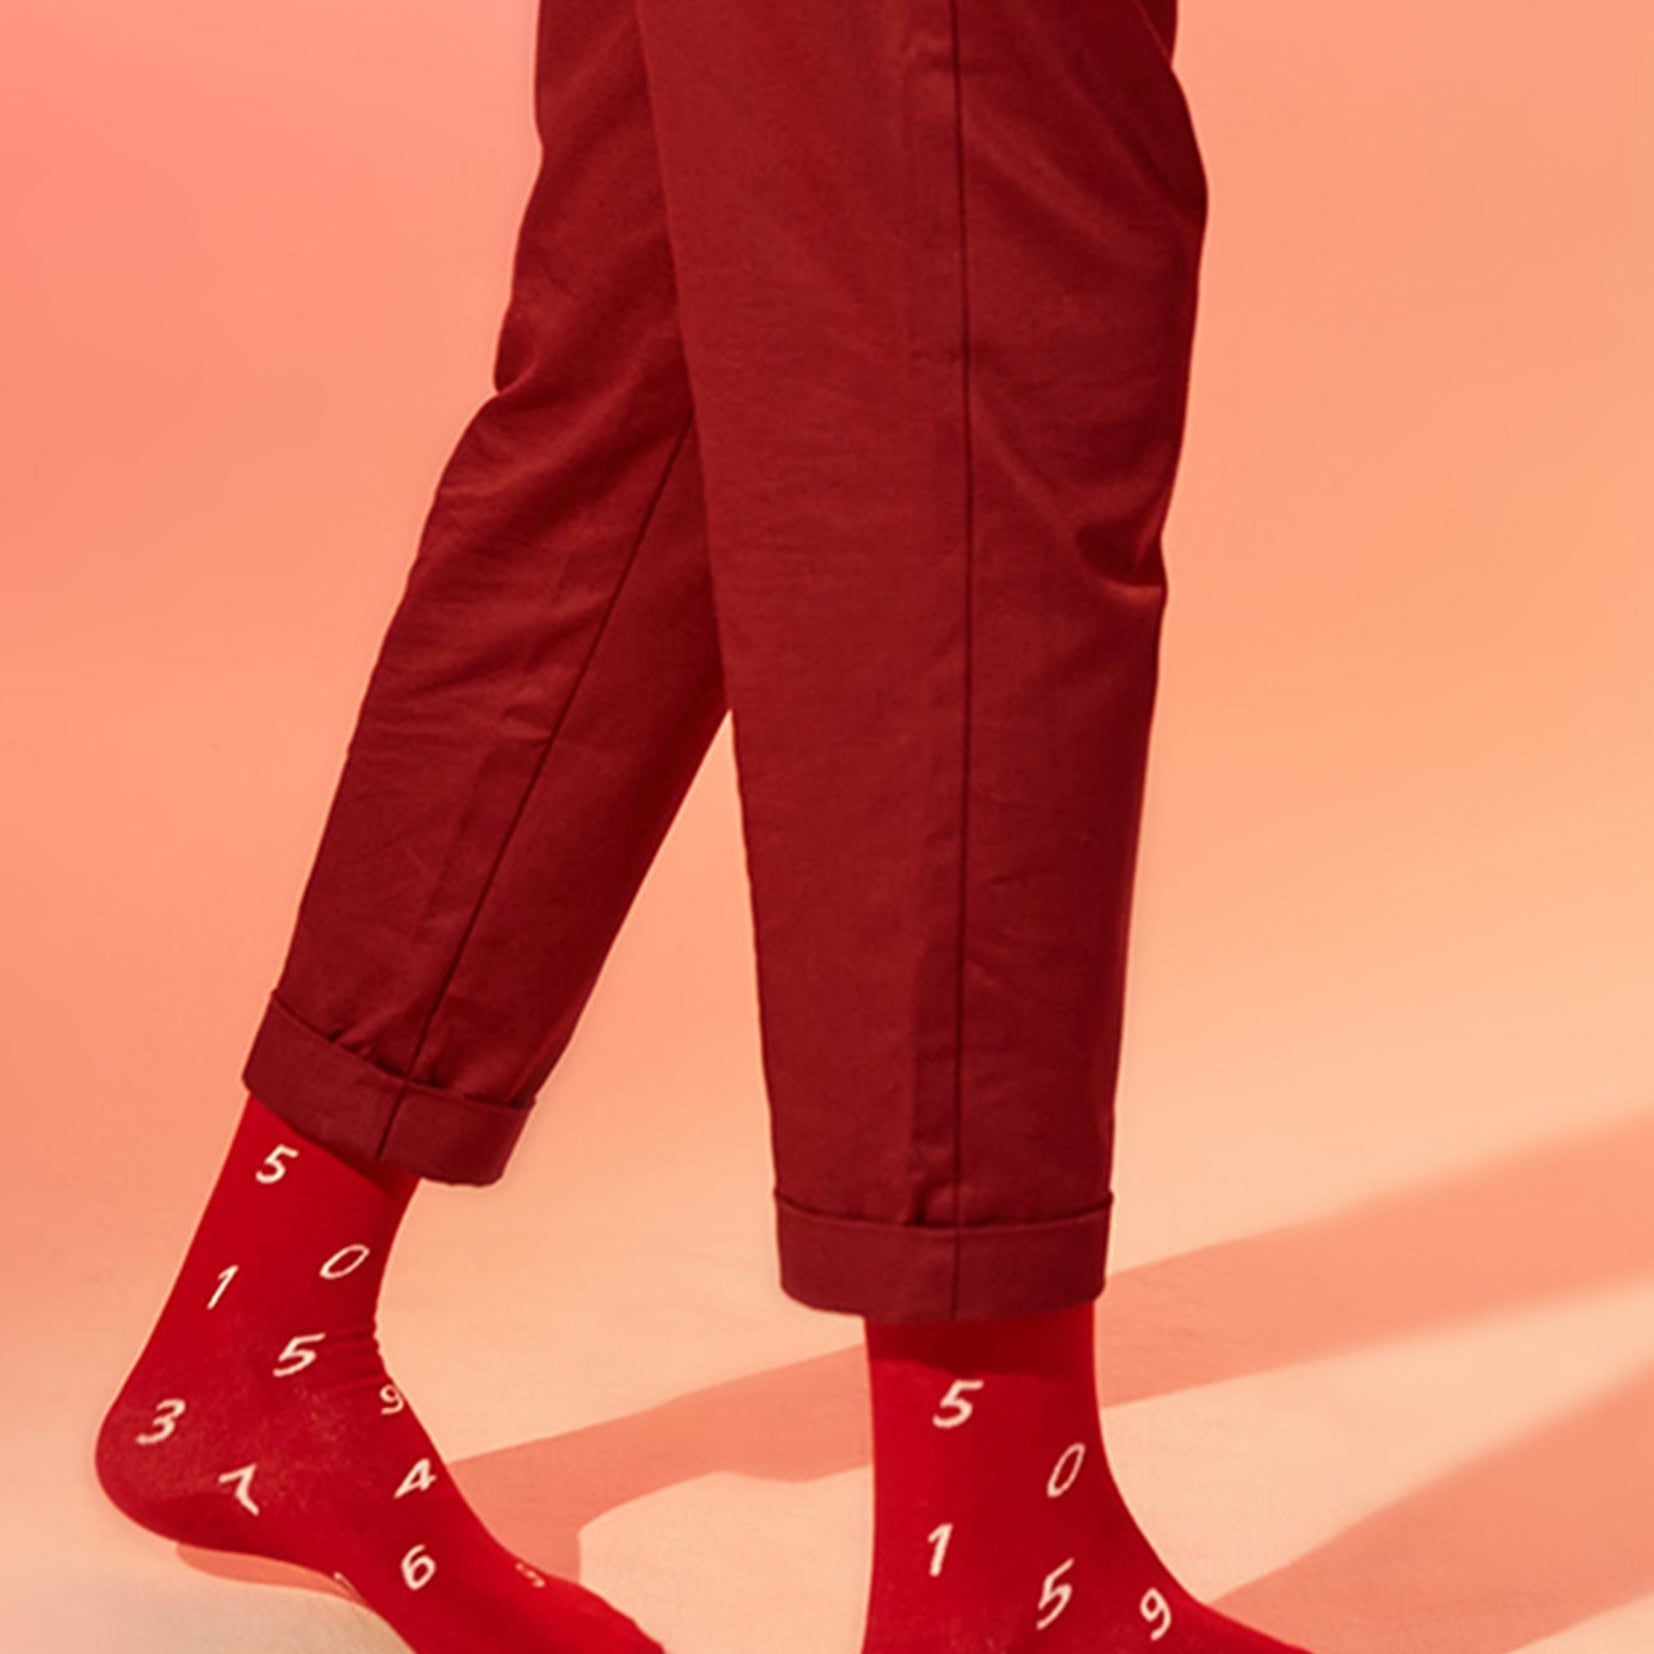 Numbers mid-calf sock in red